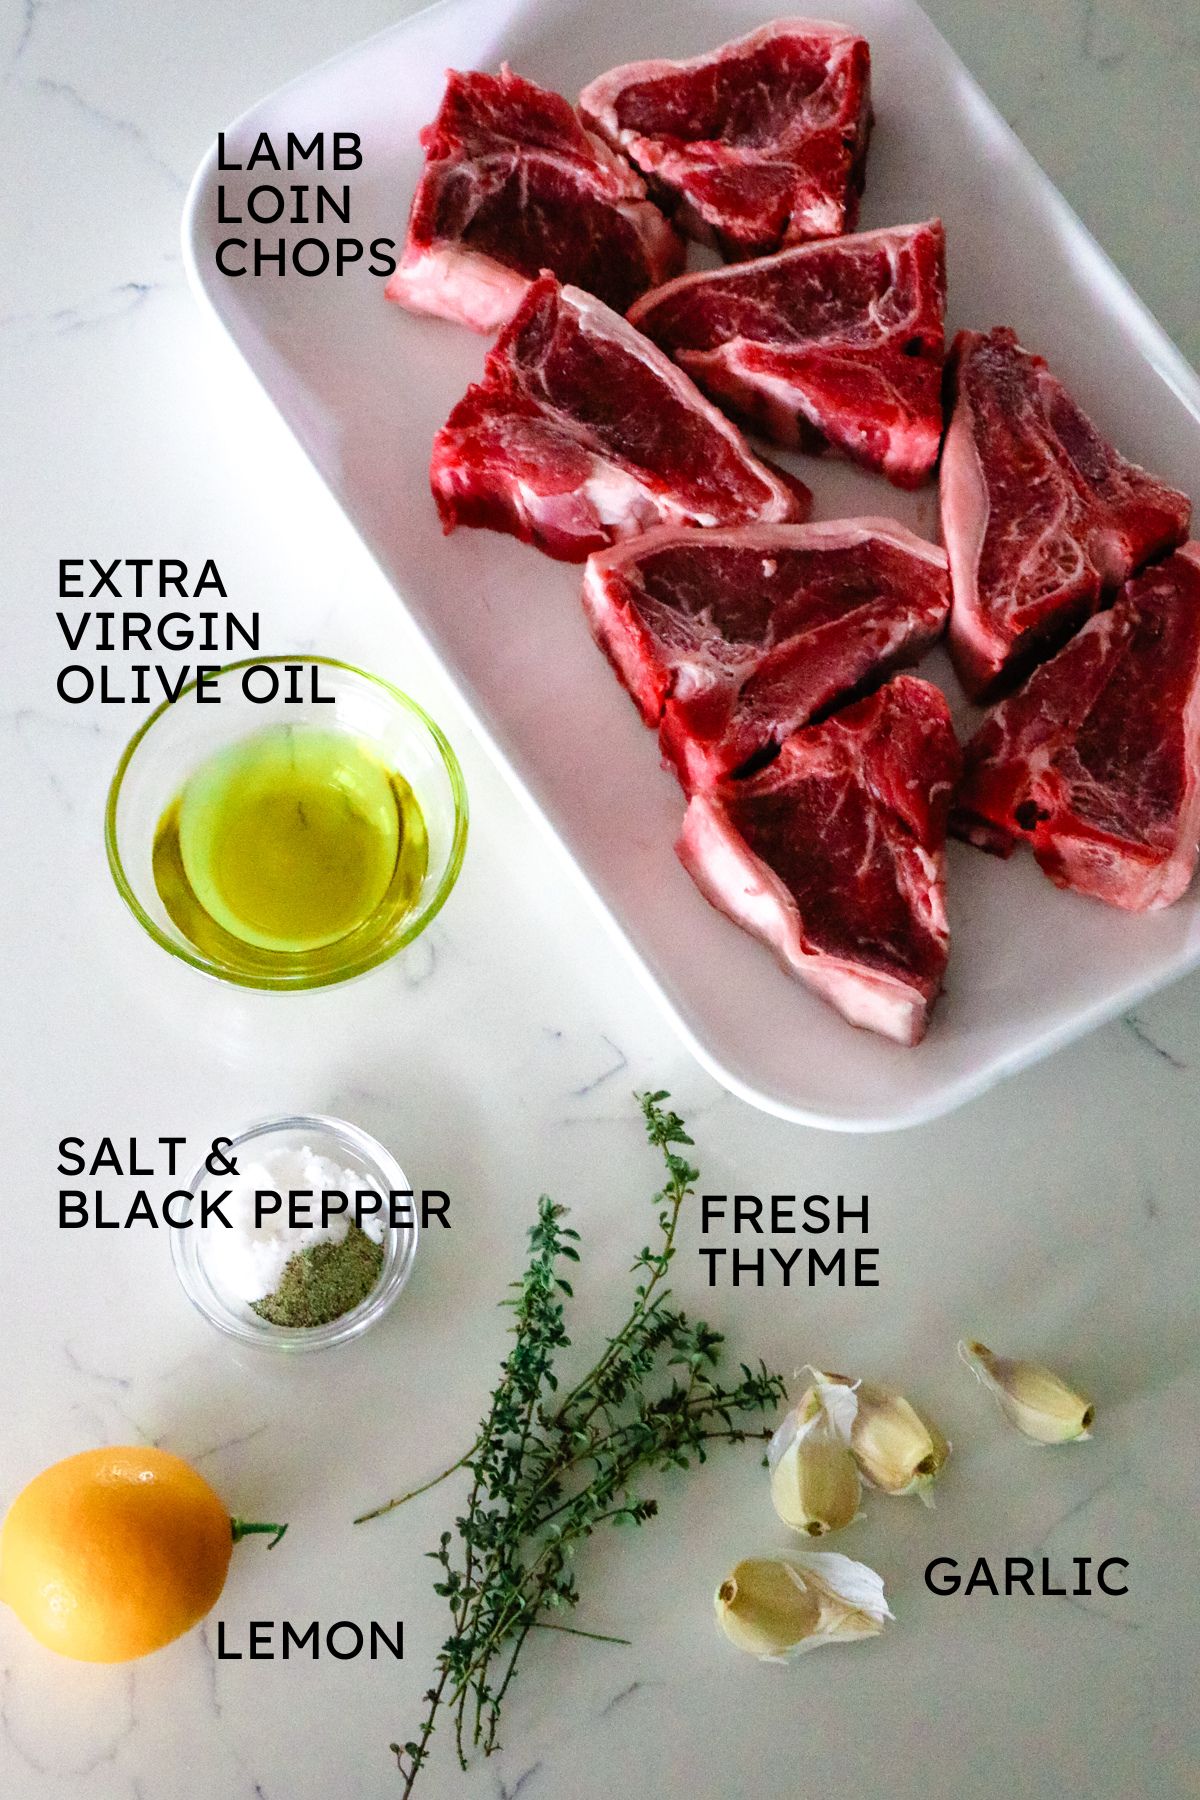 ingredients for air fryer lamb loin chops with chops, olive oil, herbs, and lemon.